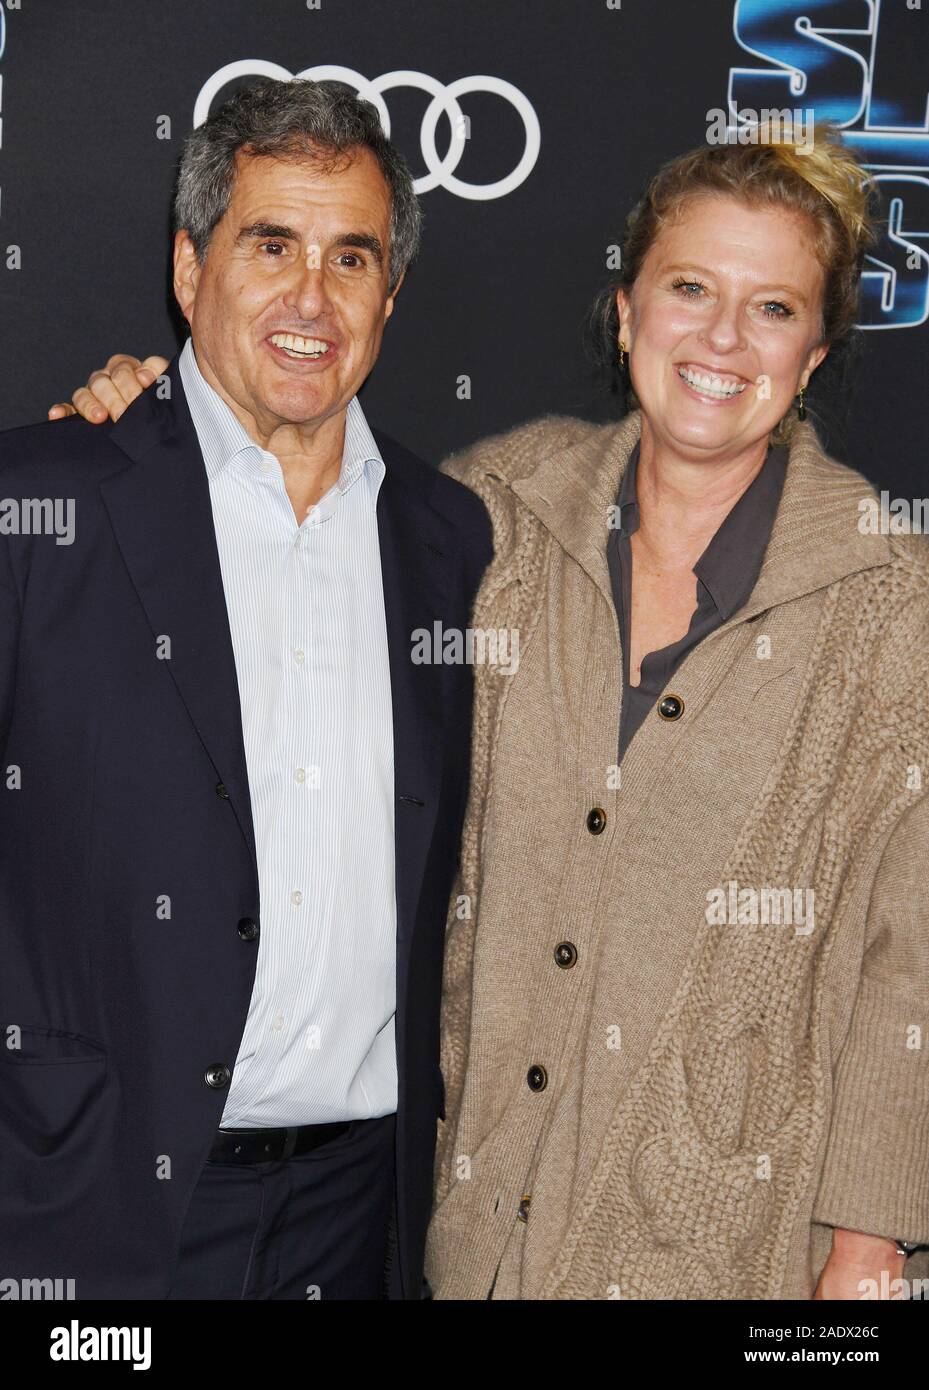 HOLLYWOOD, CA - DECEMBER 04: Producers Peter Chernin (L) and Jenno Topping attend the premiere of 20th Century Fox's 'Spies In Disguise' at El Capitan Theatre on December 04, 2019 in Los Angeles, California. Stock Photo